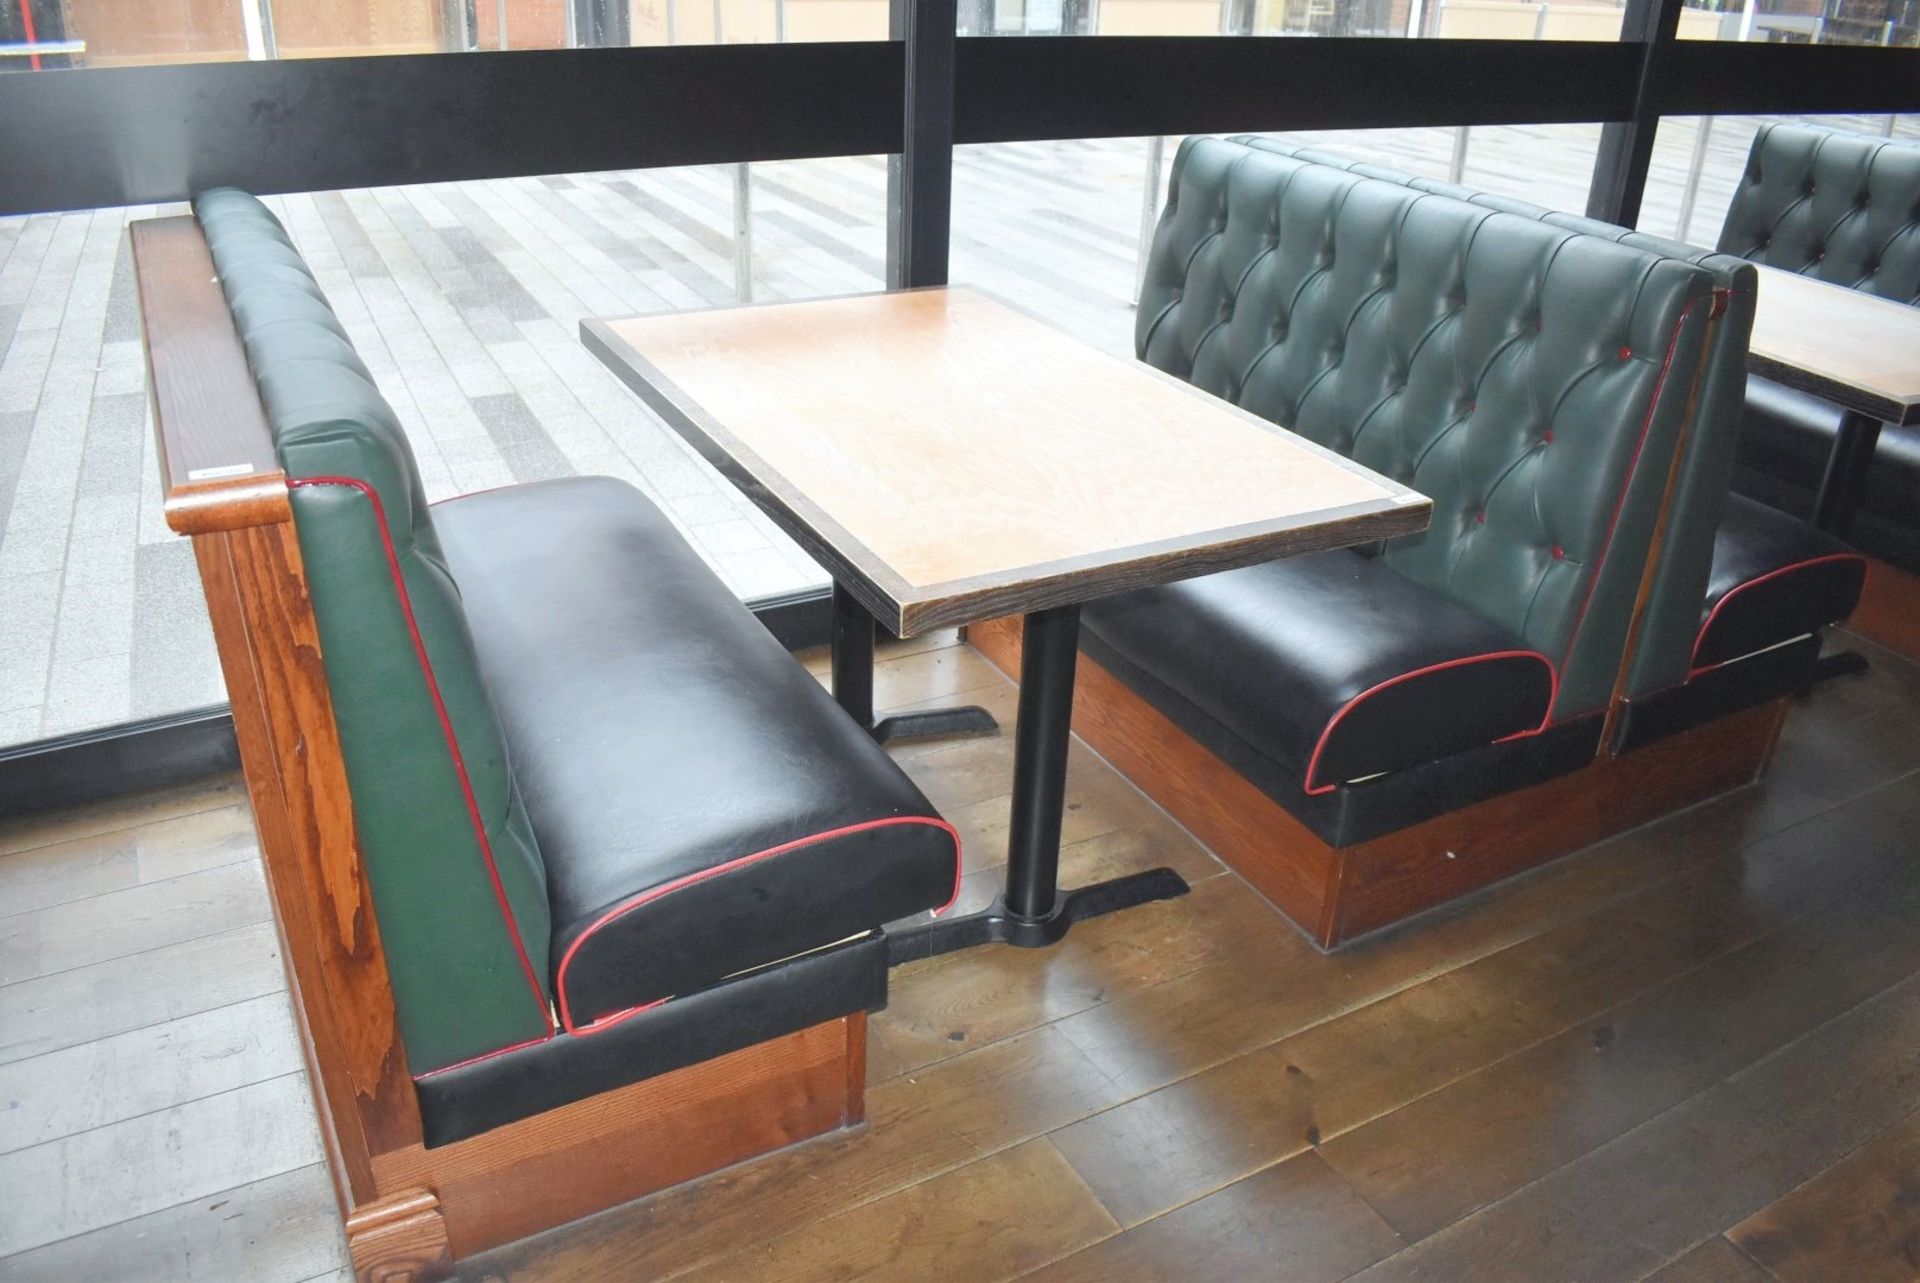 4 x Sections of Restaurant Double Booth Seating - Sits Up to 12 Persons - Green & Black Upholstery - Image 2 of 24